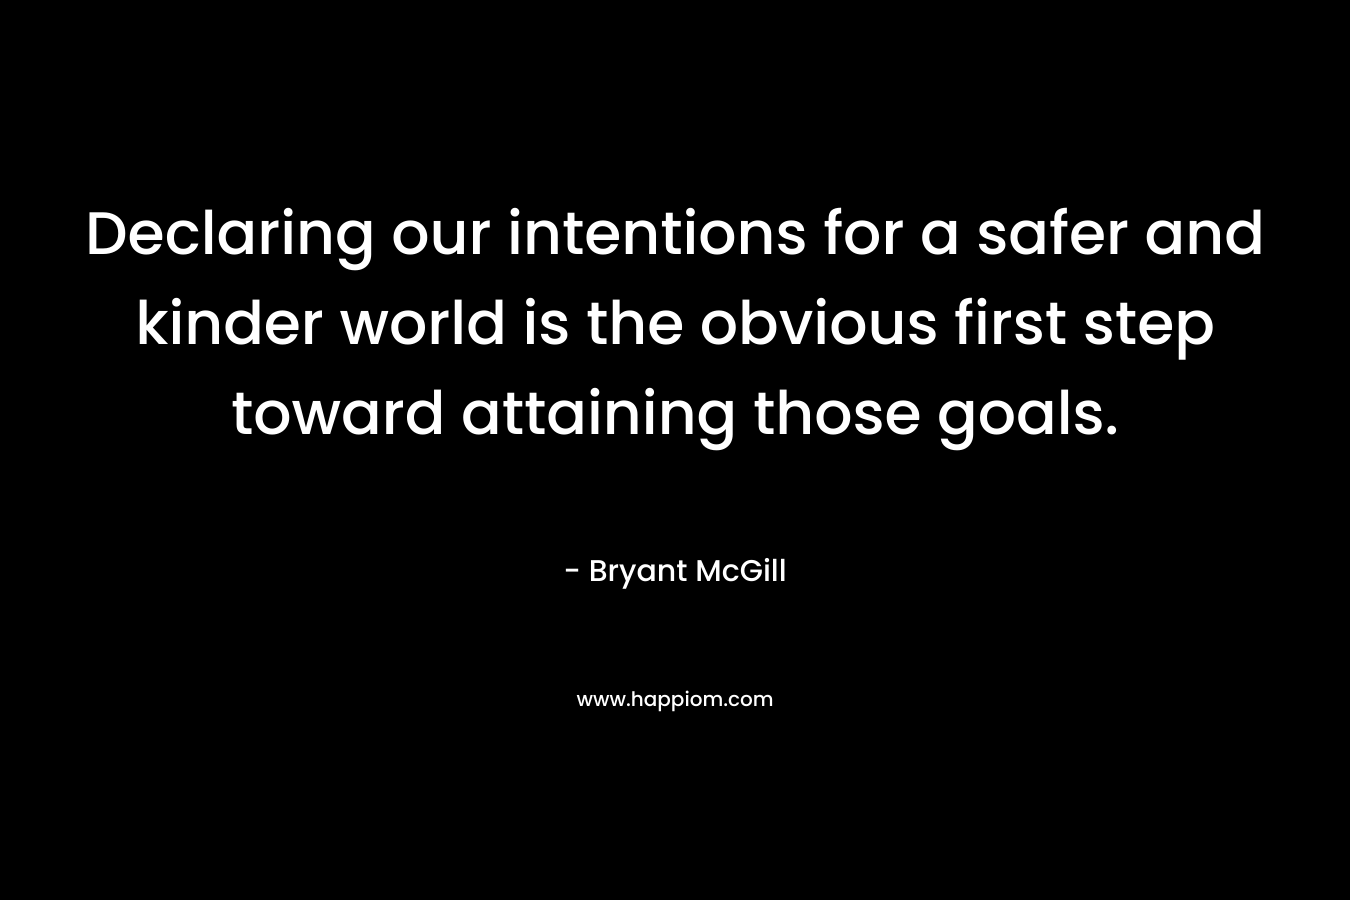 Declaring our intentions for a safer and kinder world is the obvious first step toward attaining those goals. – Bryant McGill